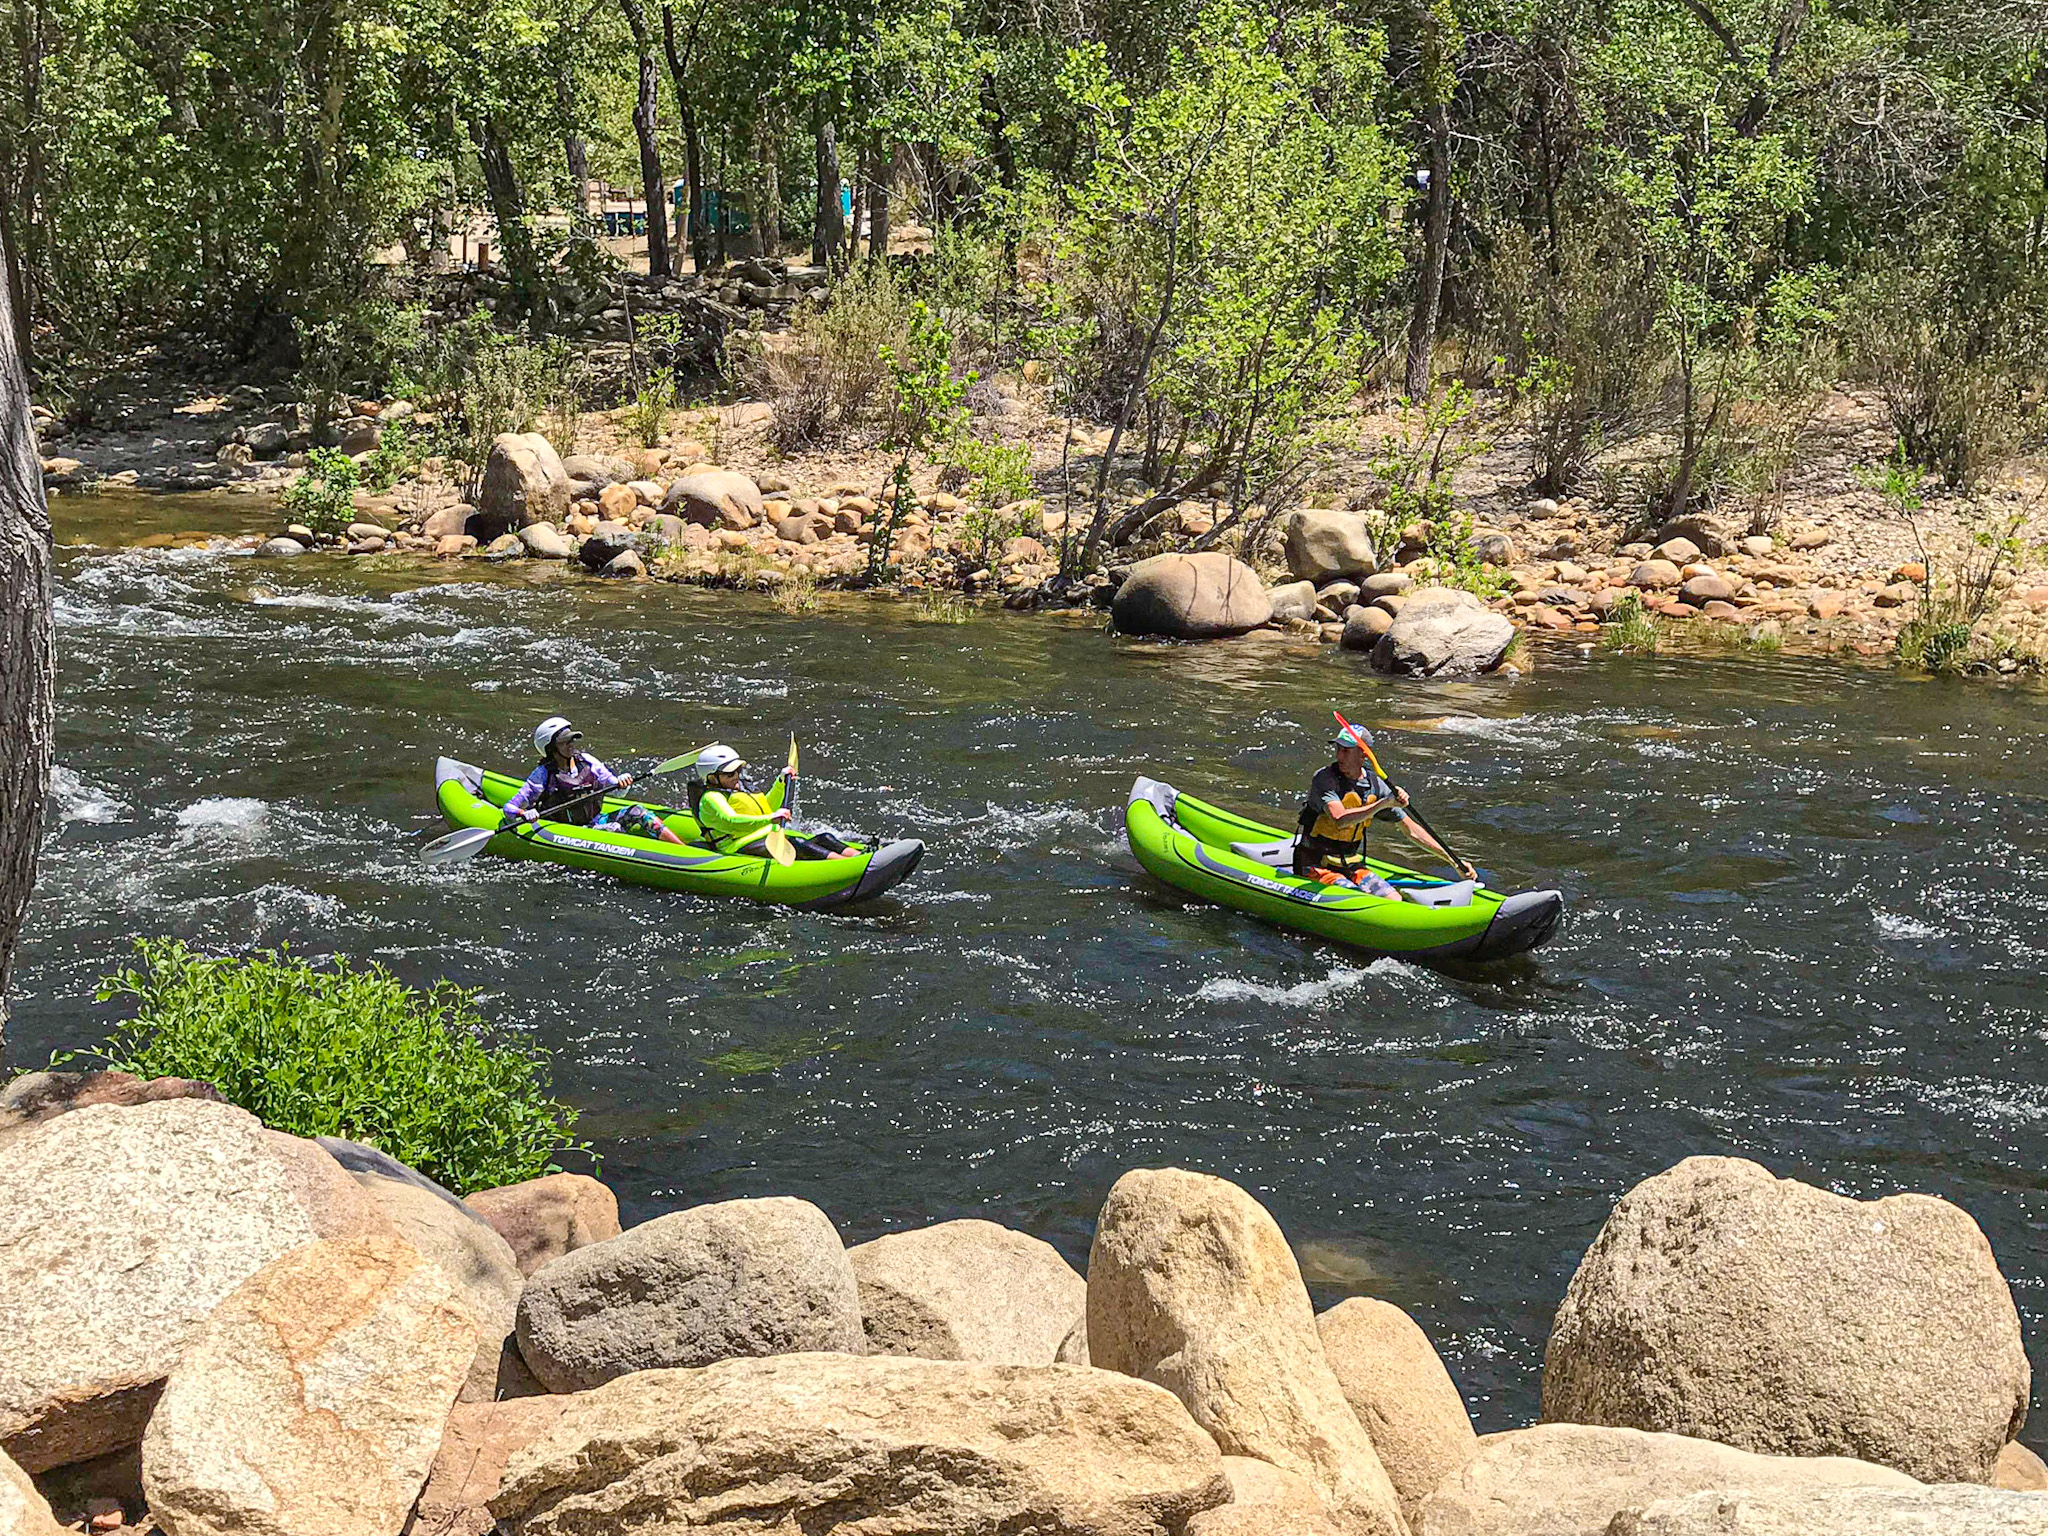 A group floating the Kern River with kayaks they rented from Kern River Rentals.